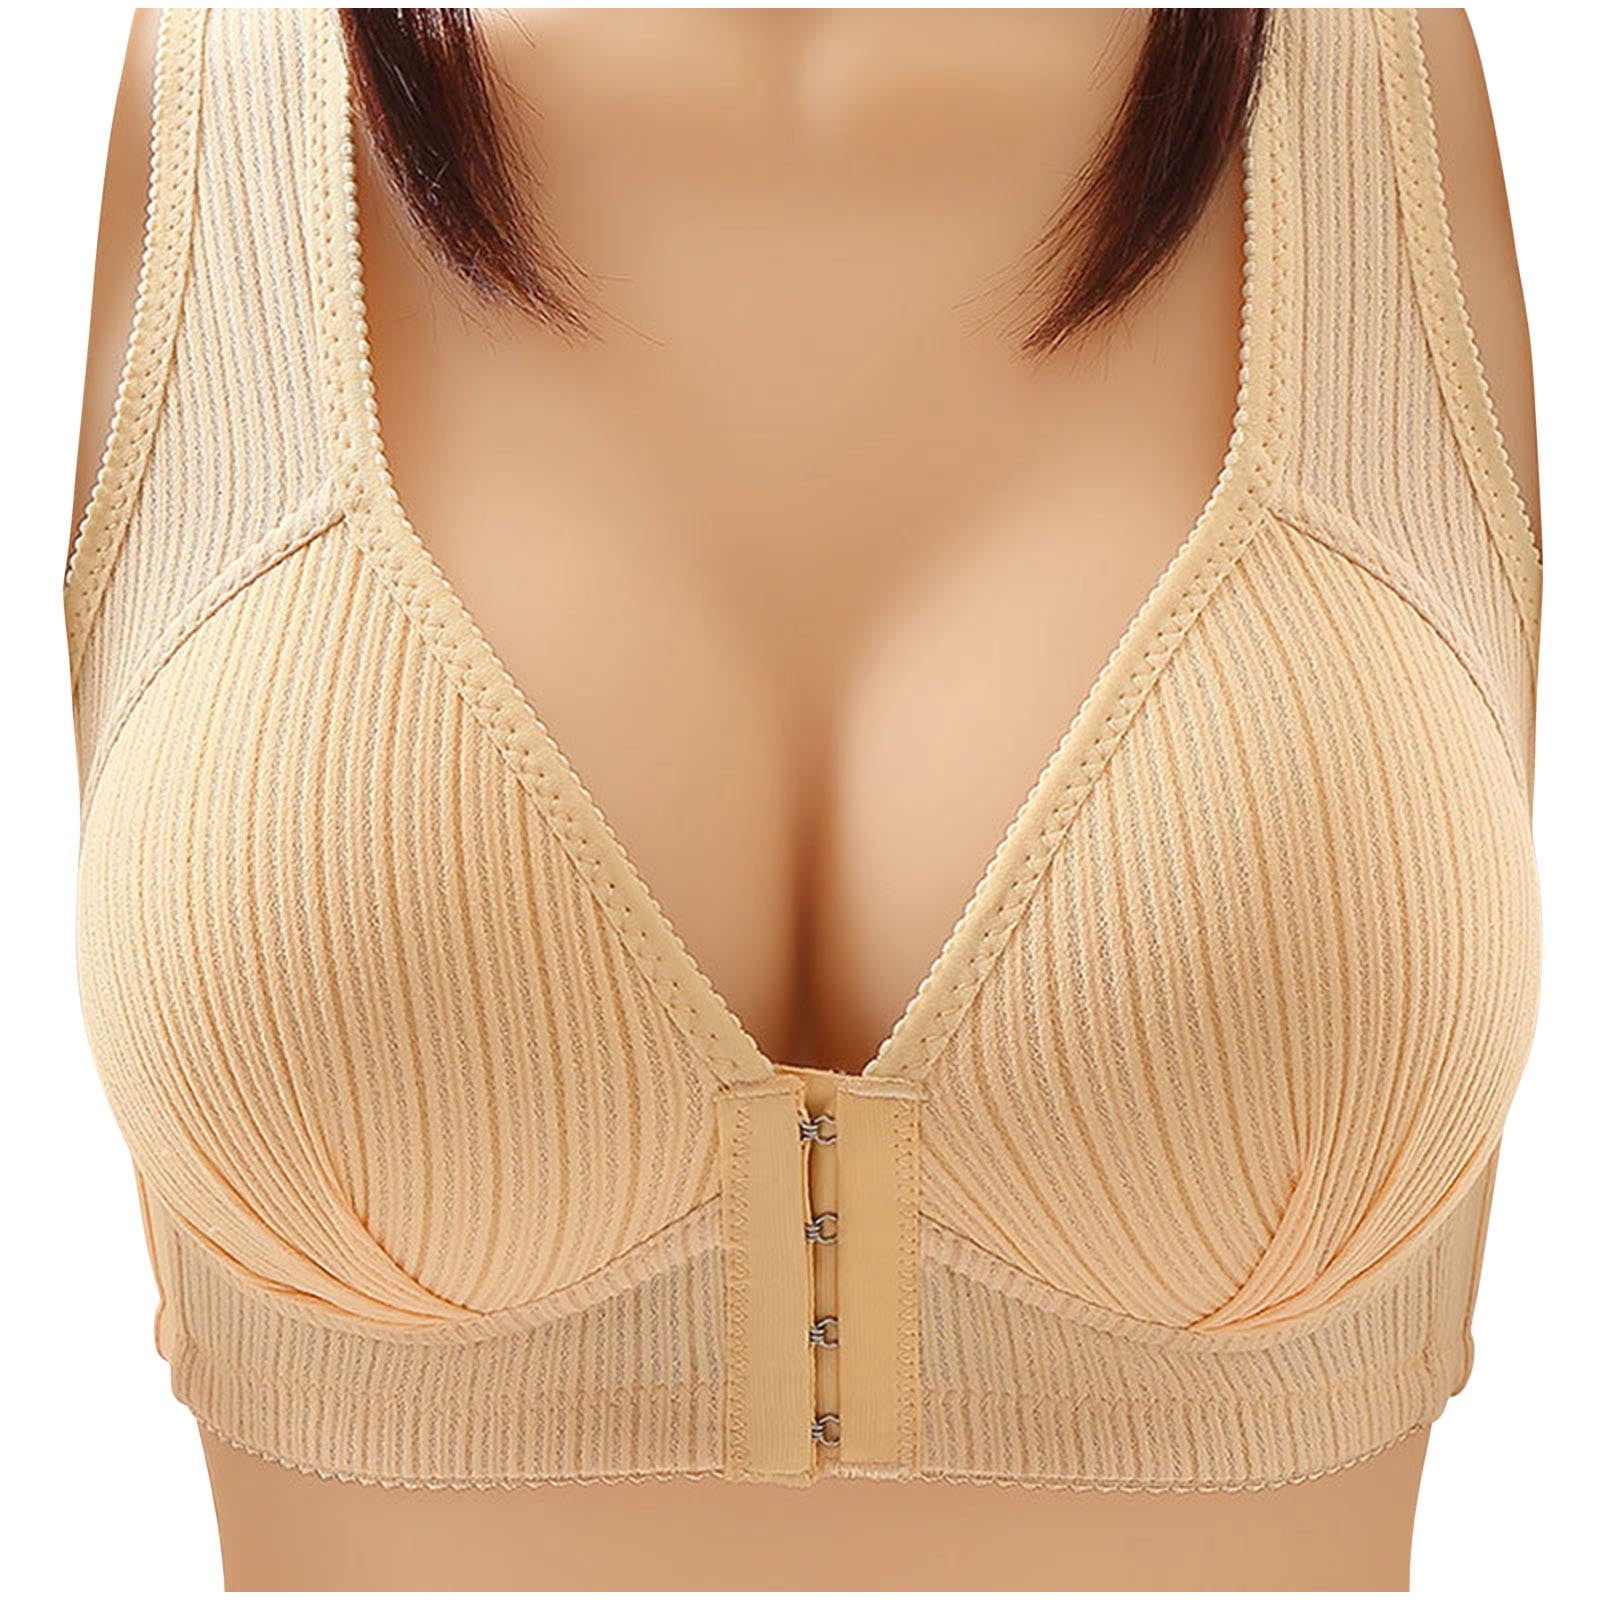 Bras, Panties & Lingerie Women Department: Assets Red Hot Label By Spanx,  Body Shapers - JCPenney